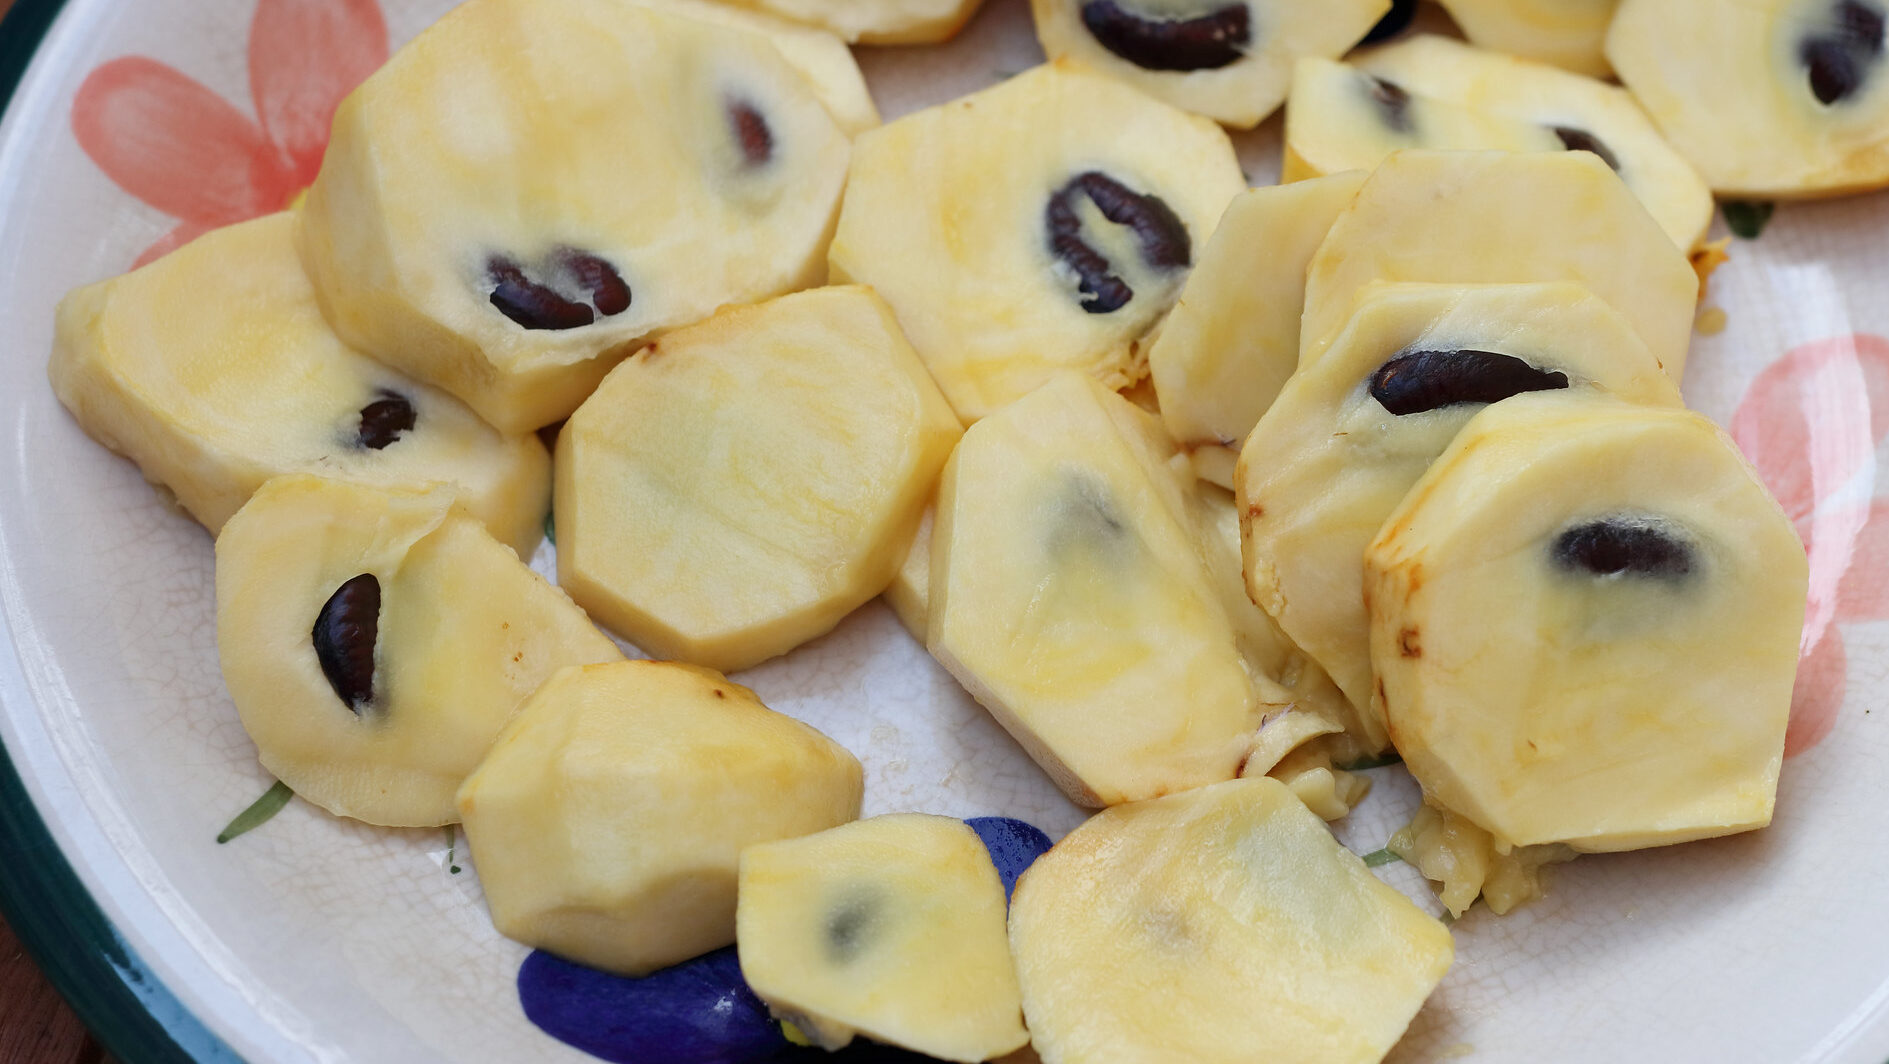 Sliced Pawpaw fruit on a floral patterned plate.